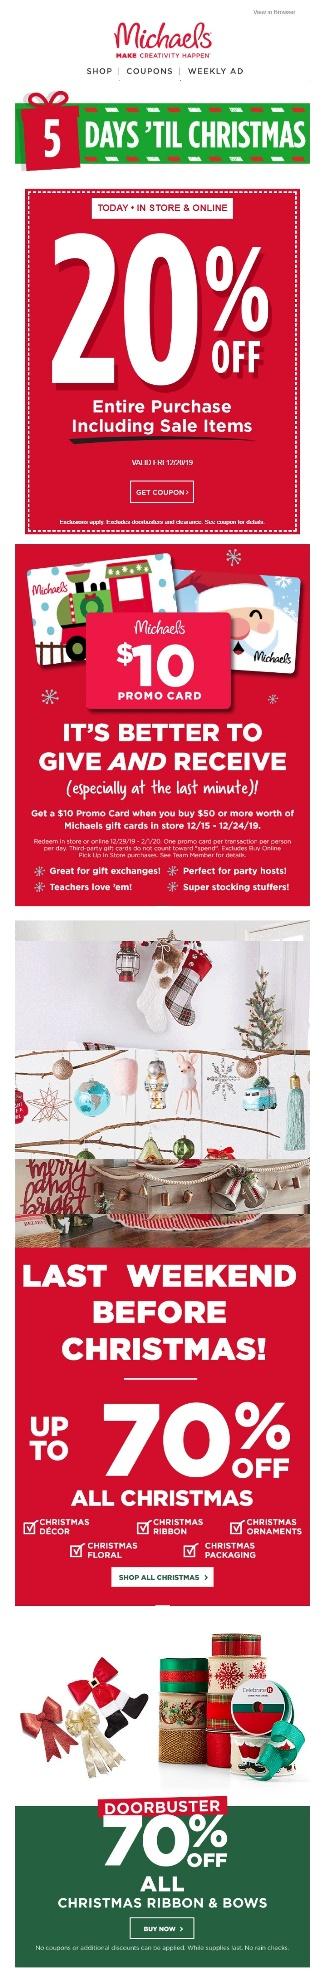 Holiday email examples of exclusive, last-minute deals 